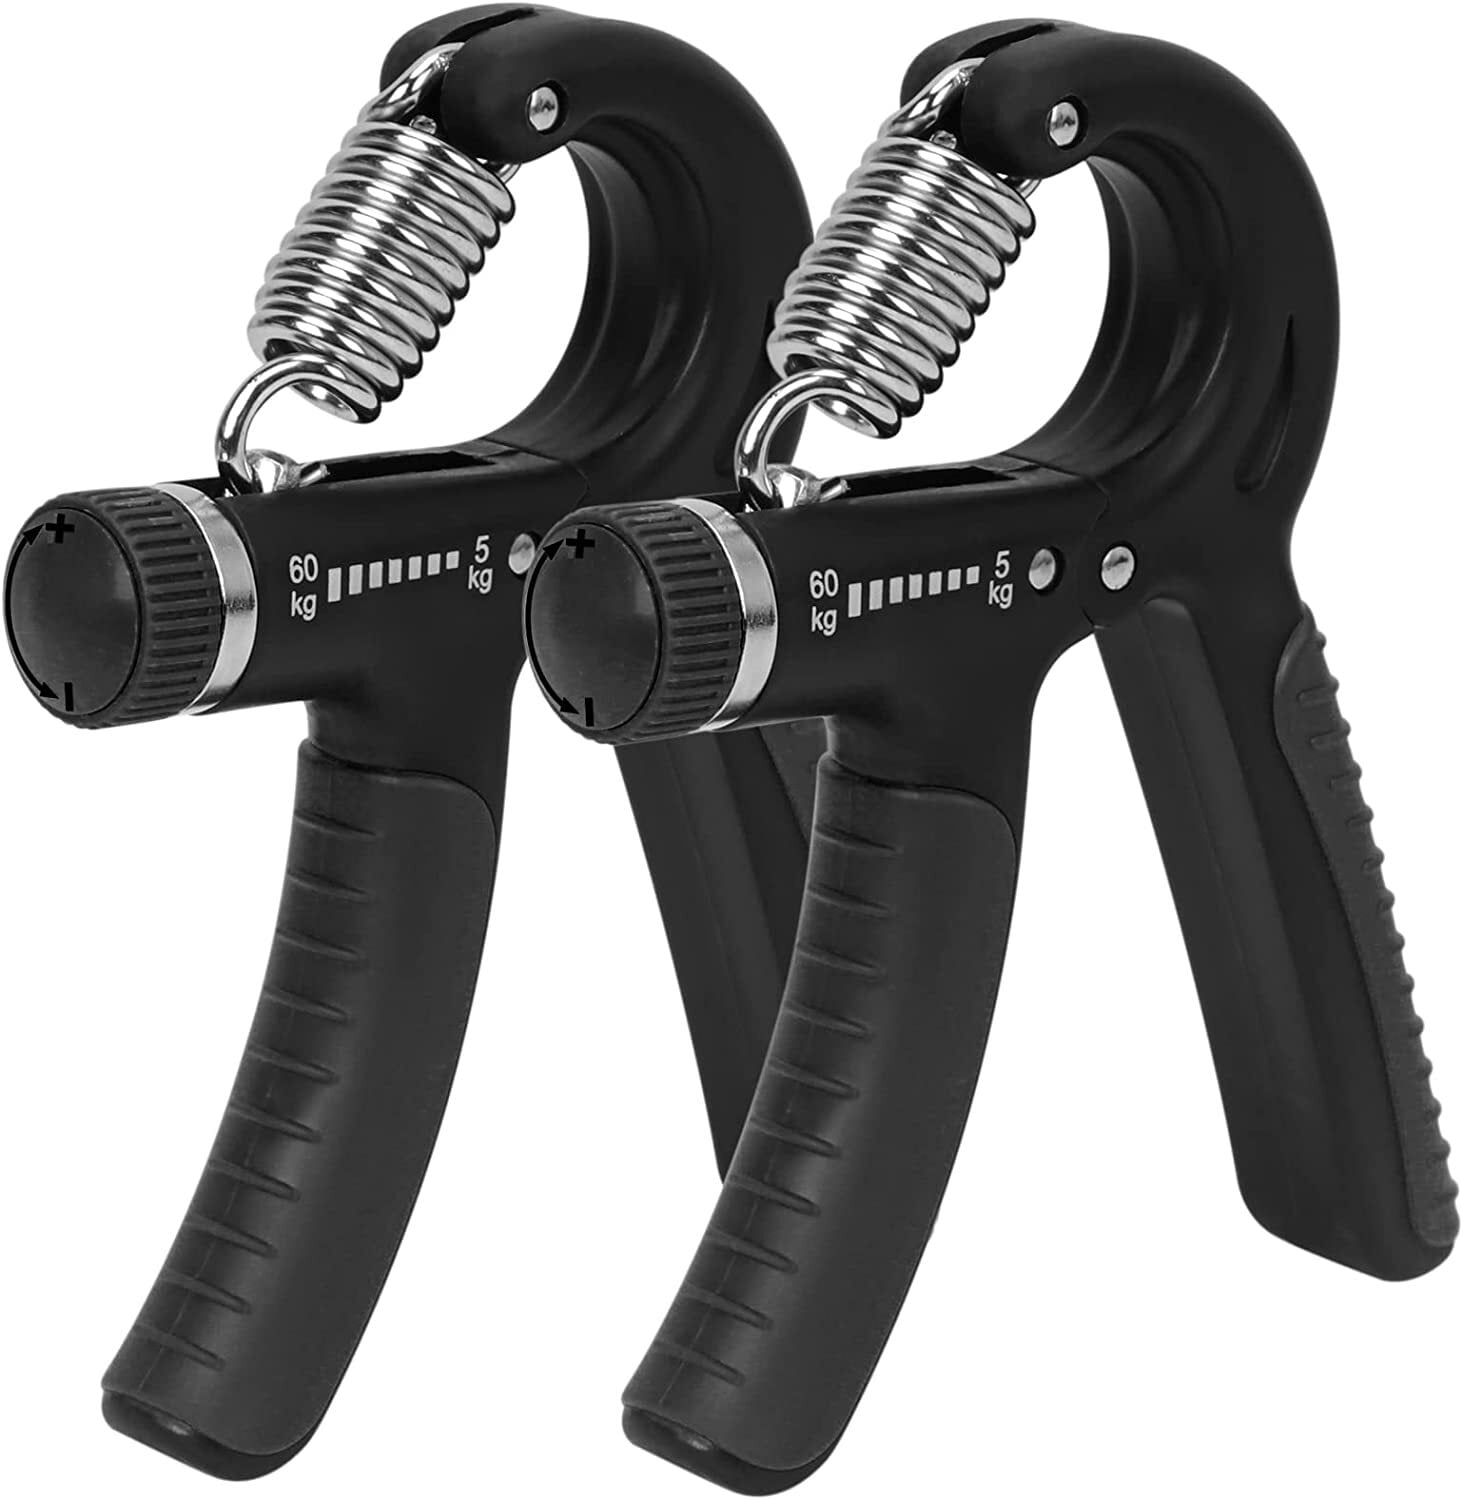 NJV Fitness Resistance Band 11 in 1 with Counter Hand Grip Strengtheners, for Men and Women, for Exercise, Stretching, Workout, Home, Gym